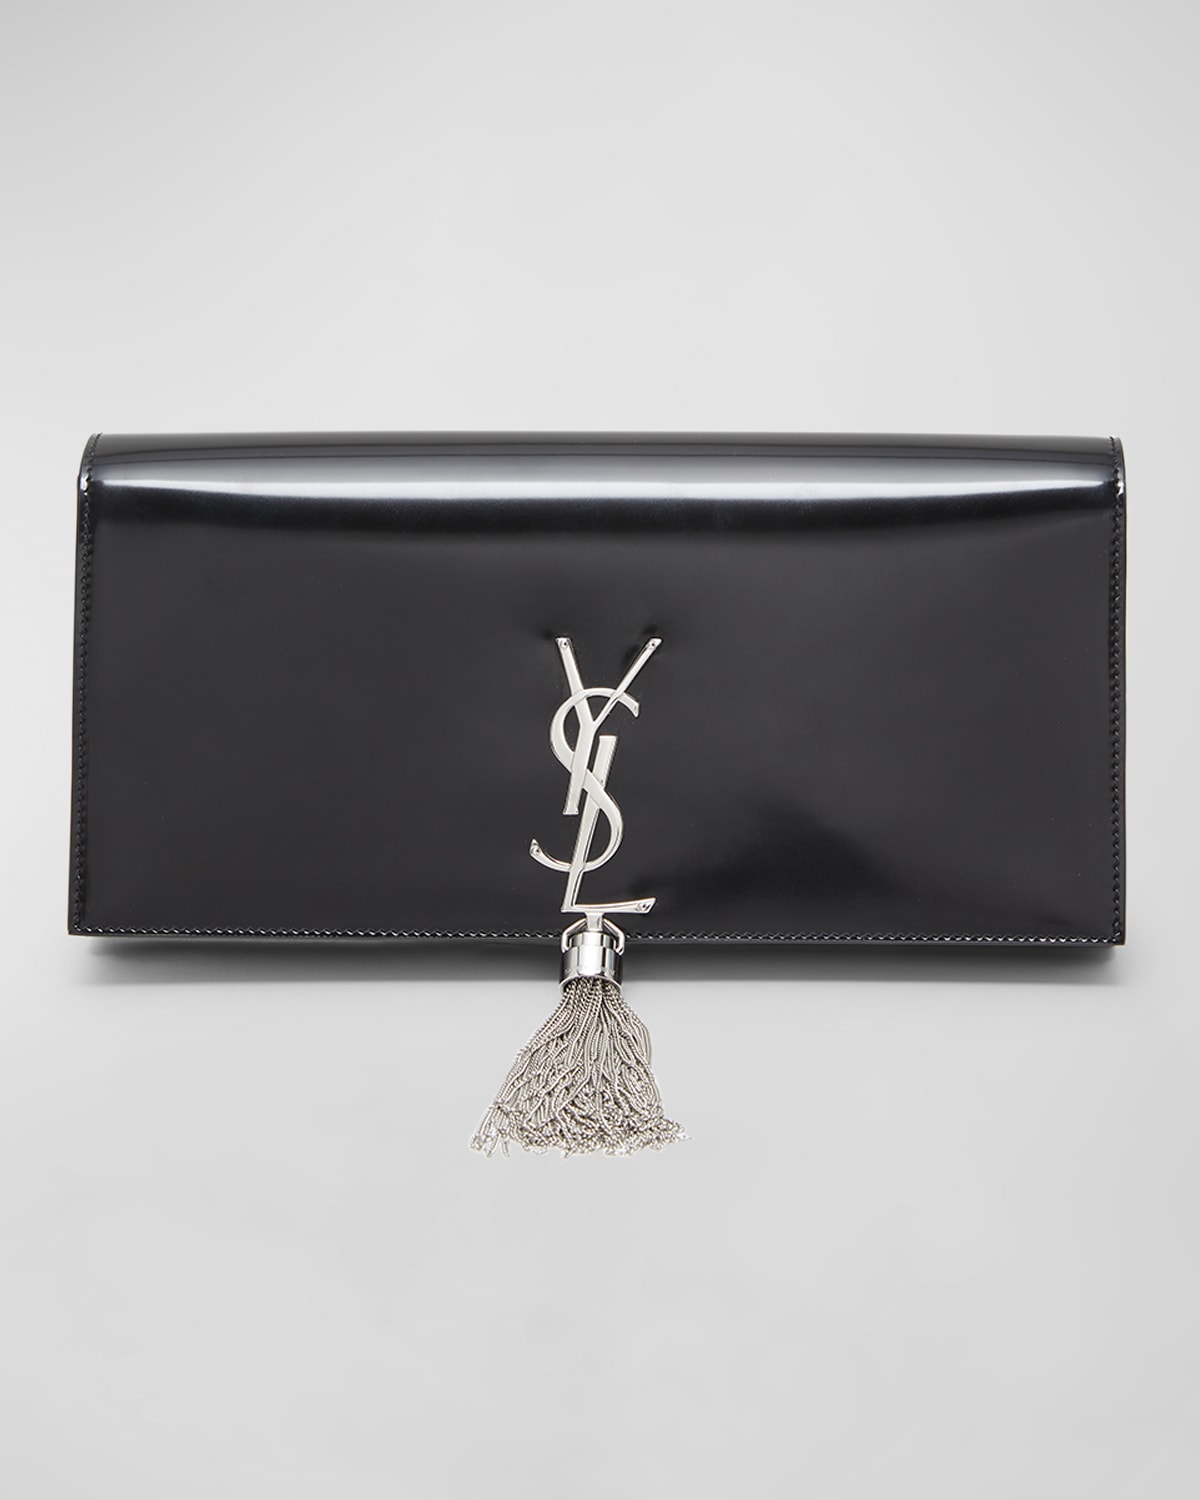 Saint Laurent Kate YSL Quilted Leather Clutch Bag | Neiman Marcus